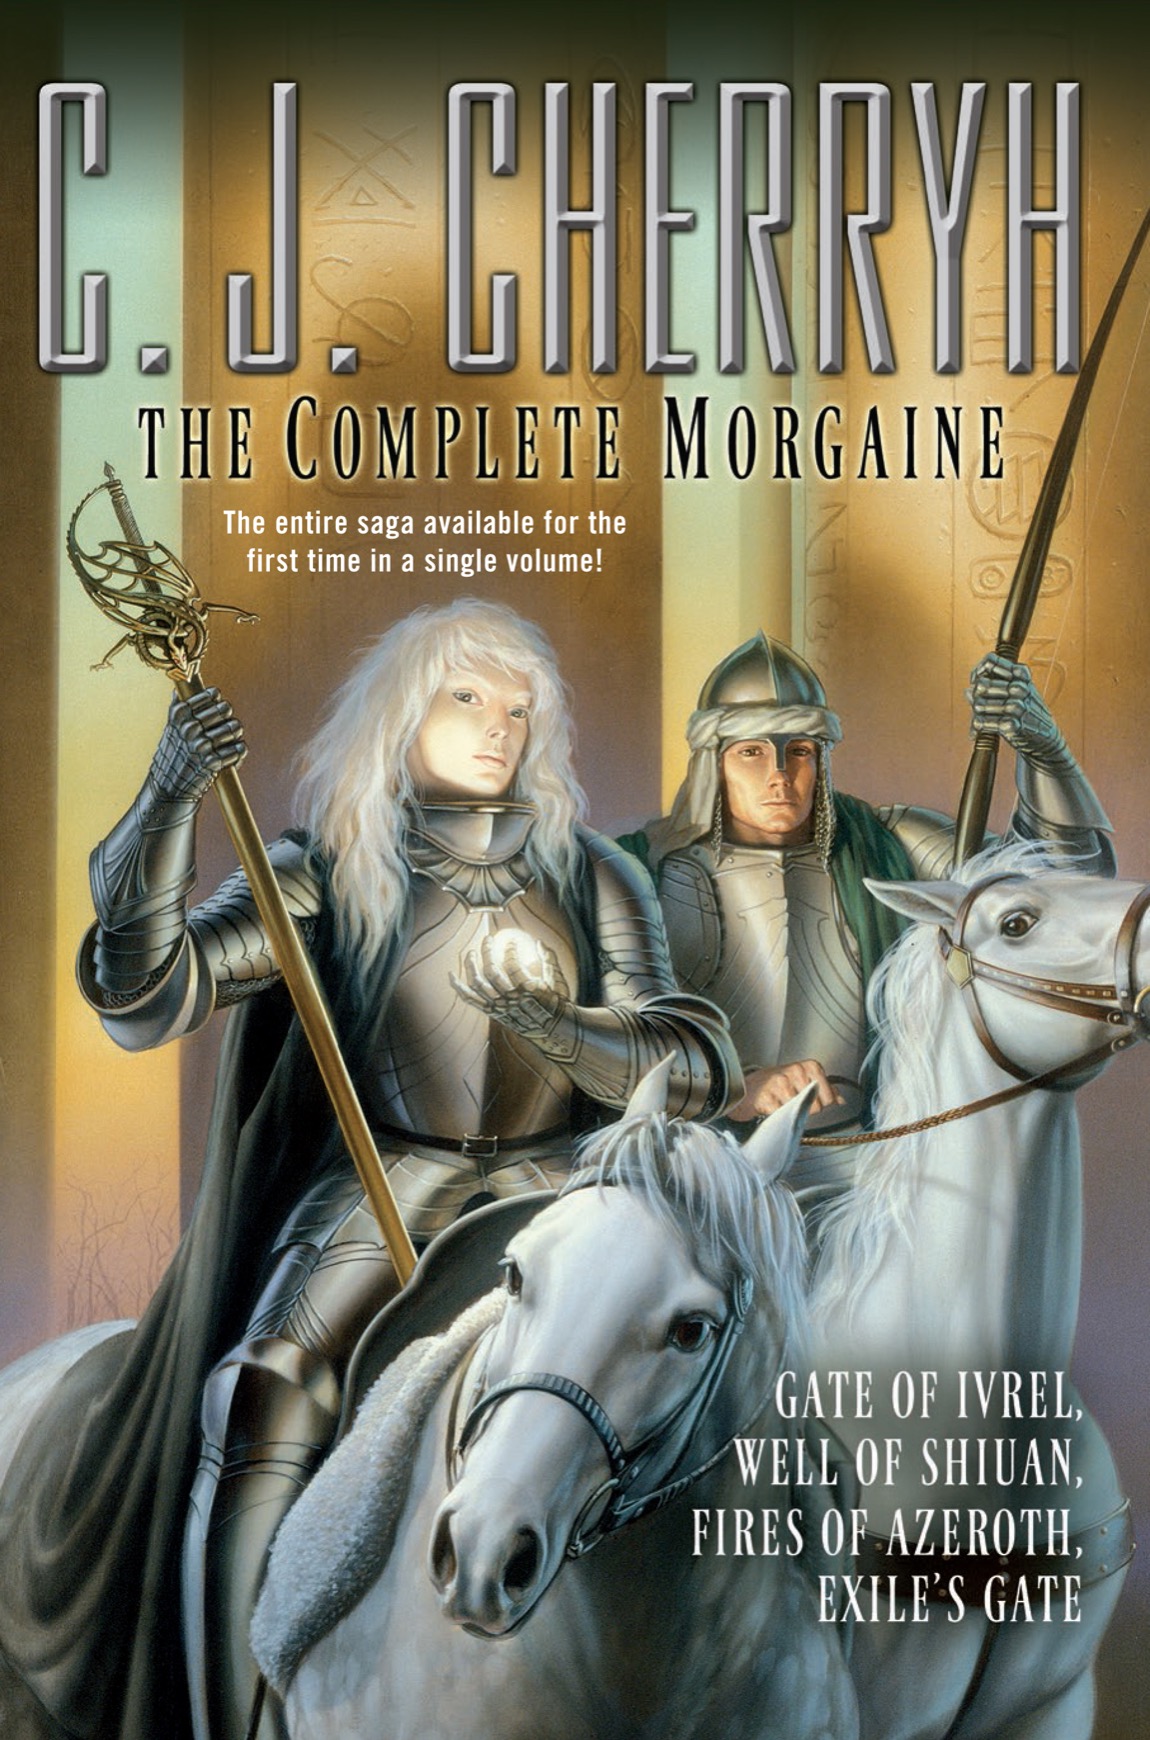 The Complete Morgaine (2015) by C J Cherryh